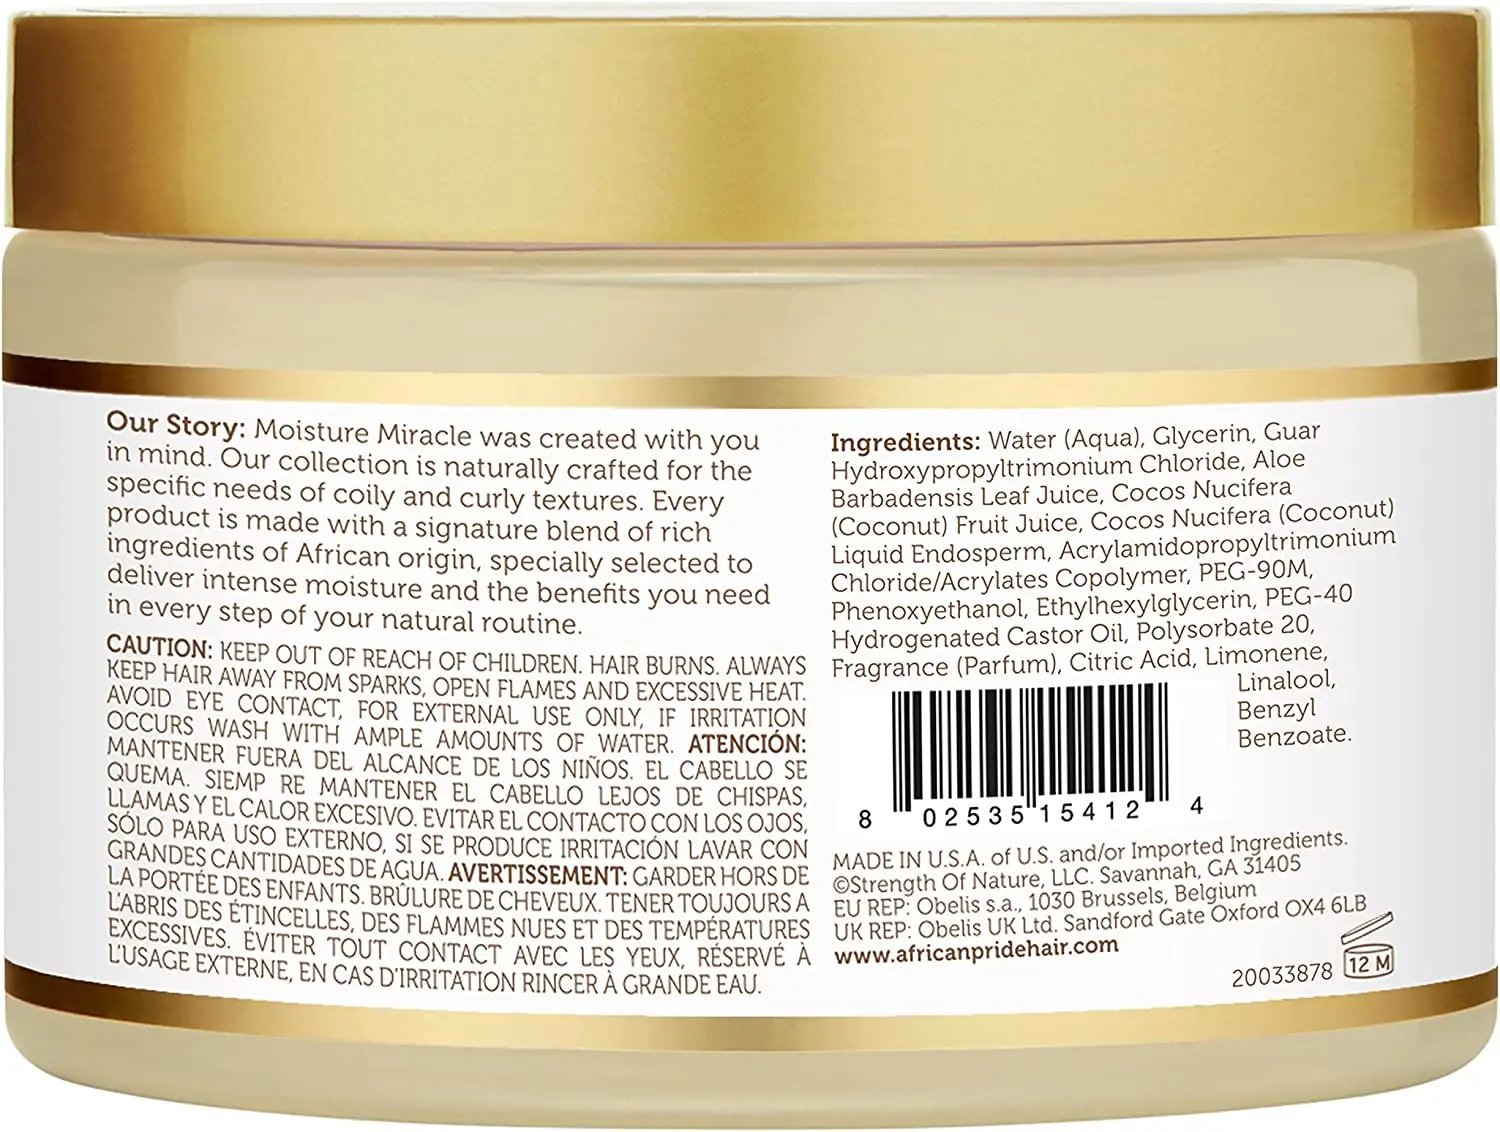 A jar of African Pride Moisture Miracle cream with a label on it.